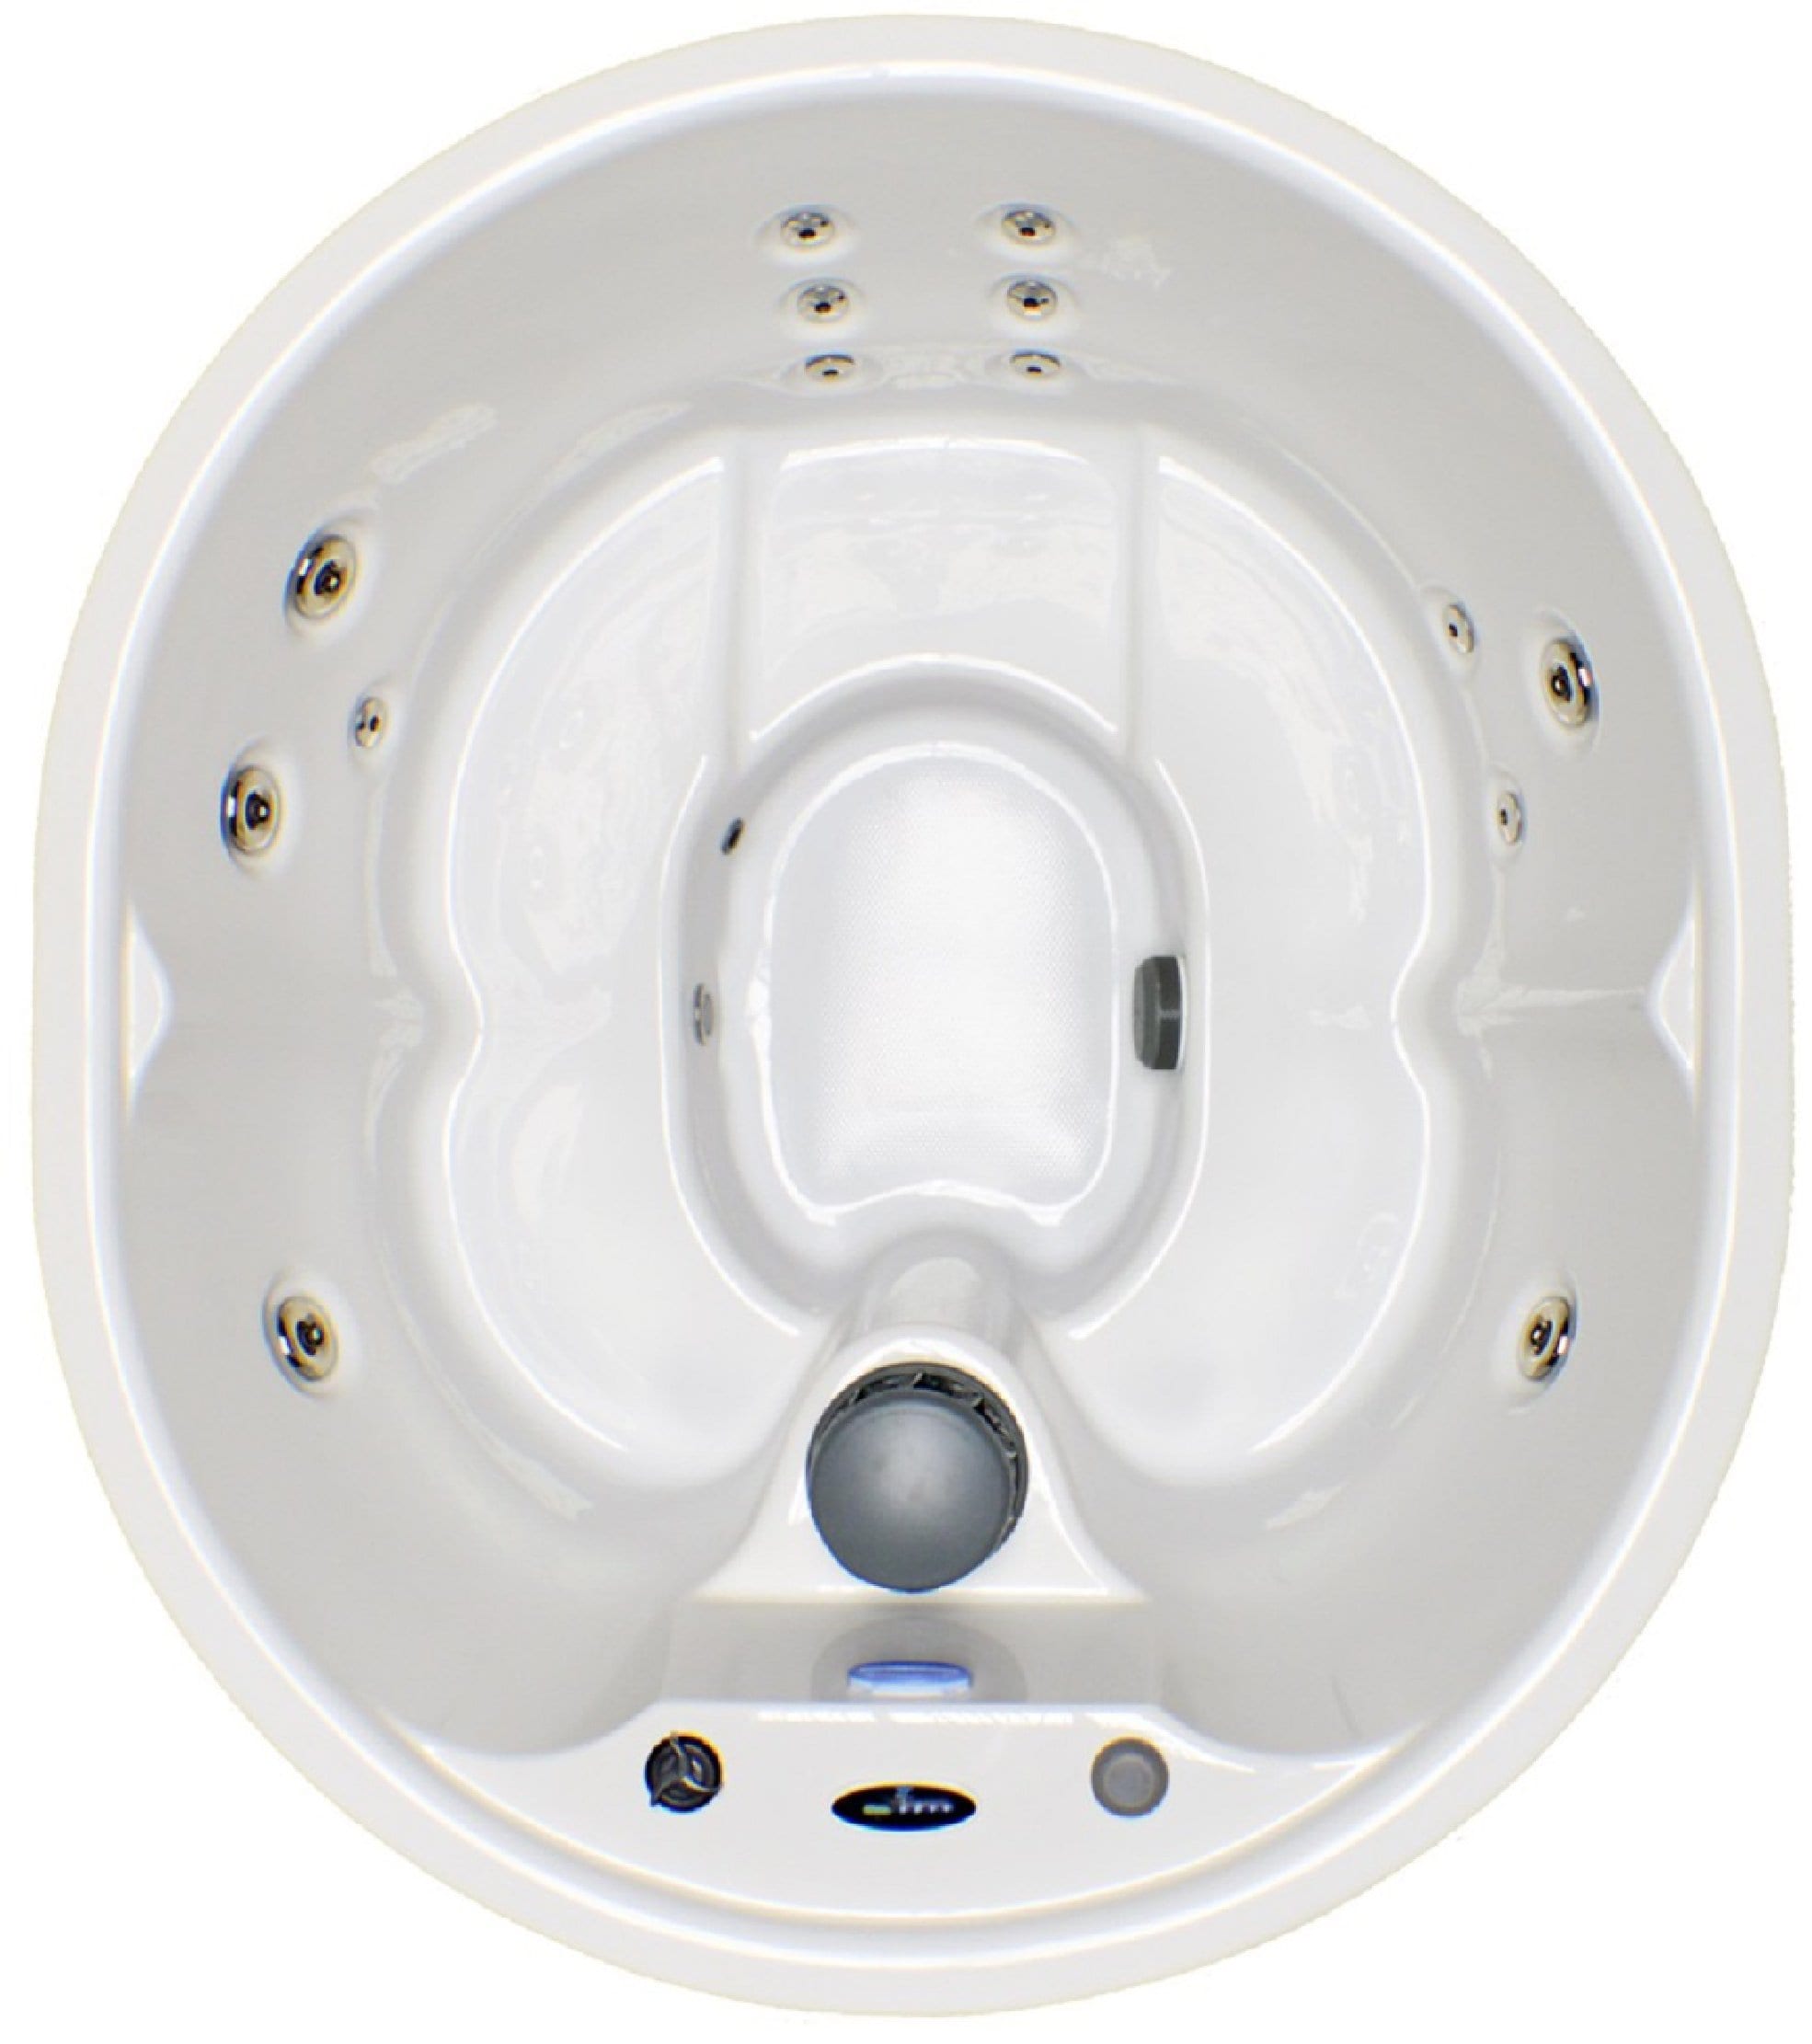 Hudson Bay Spas 5-Person Oval Hot Tub at Lowes.com